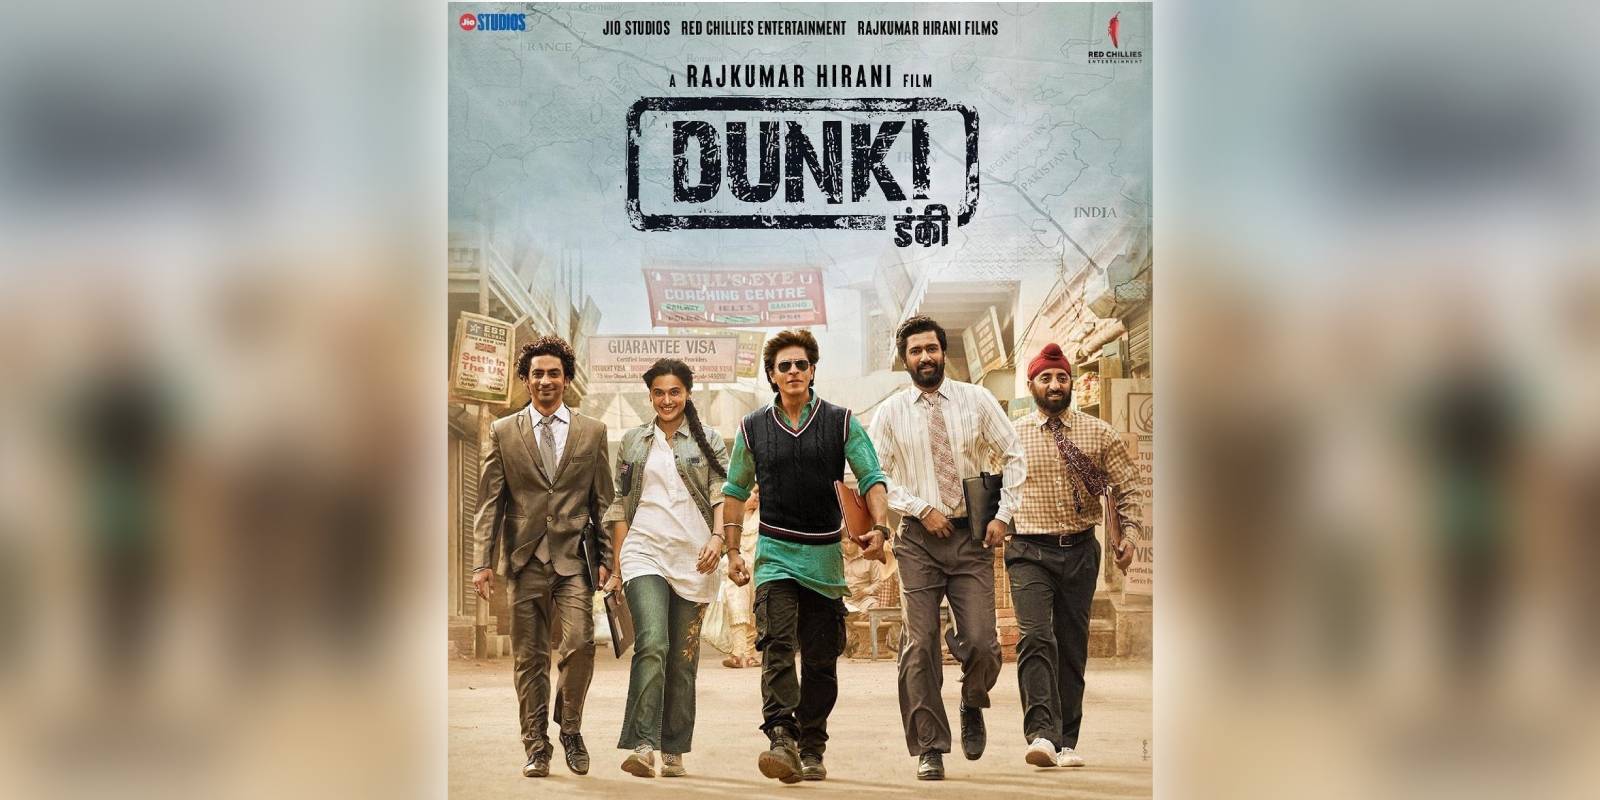 A poster of the film Dunki